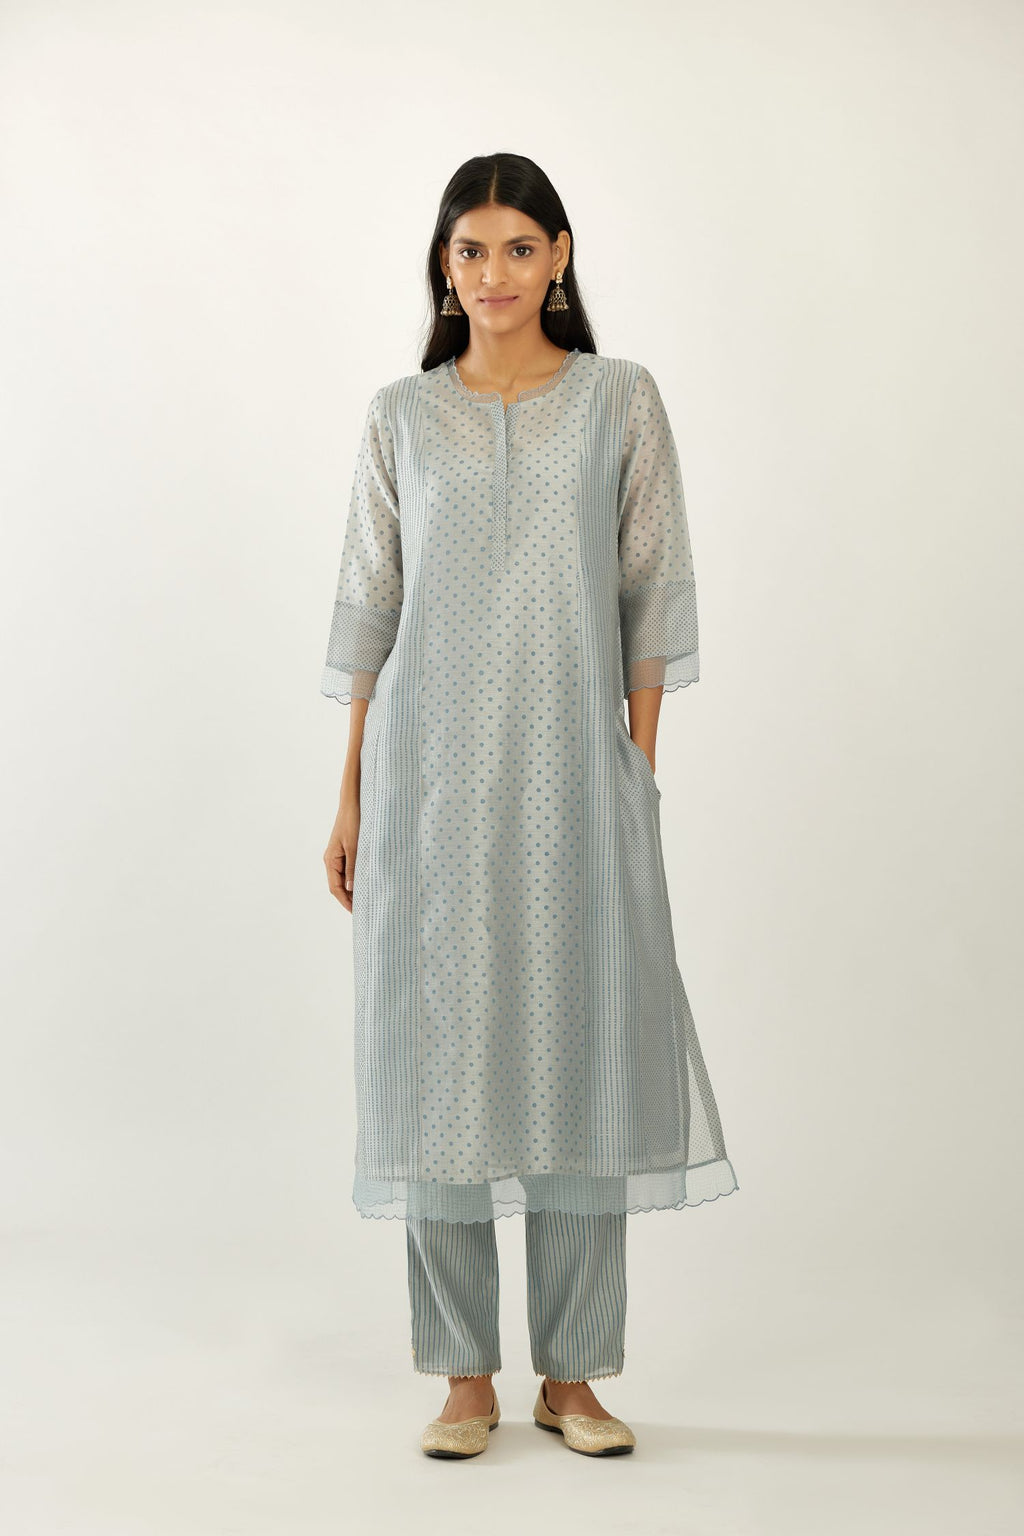 Blue silk chanderi hand block printed straight kurta set with concealed button placket neckline, highlighted with scalloped organza at edges.